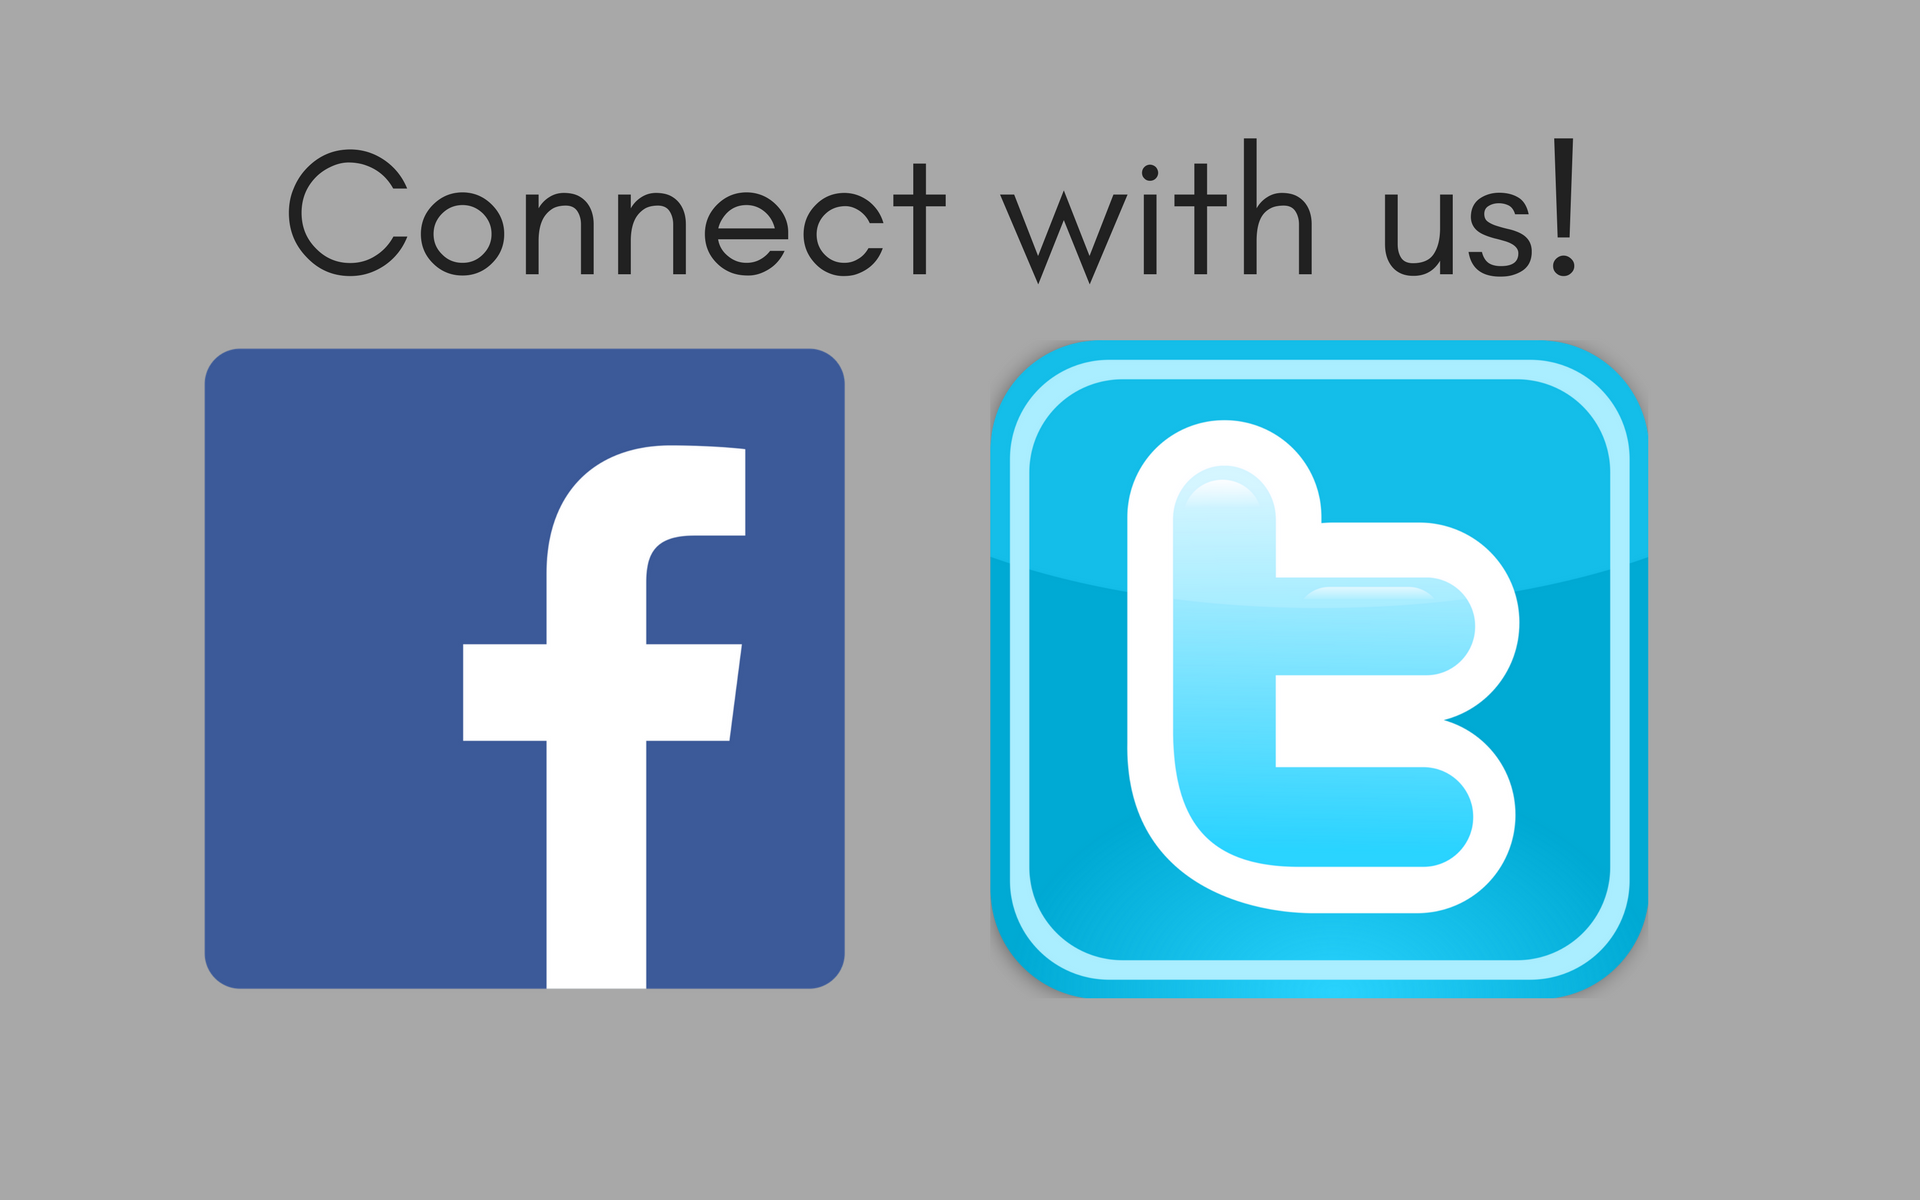 Connect with us on Facebook and Twitter!